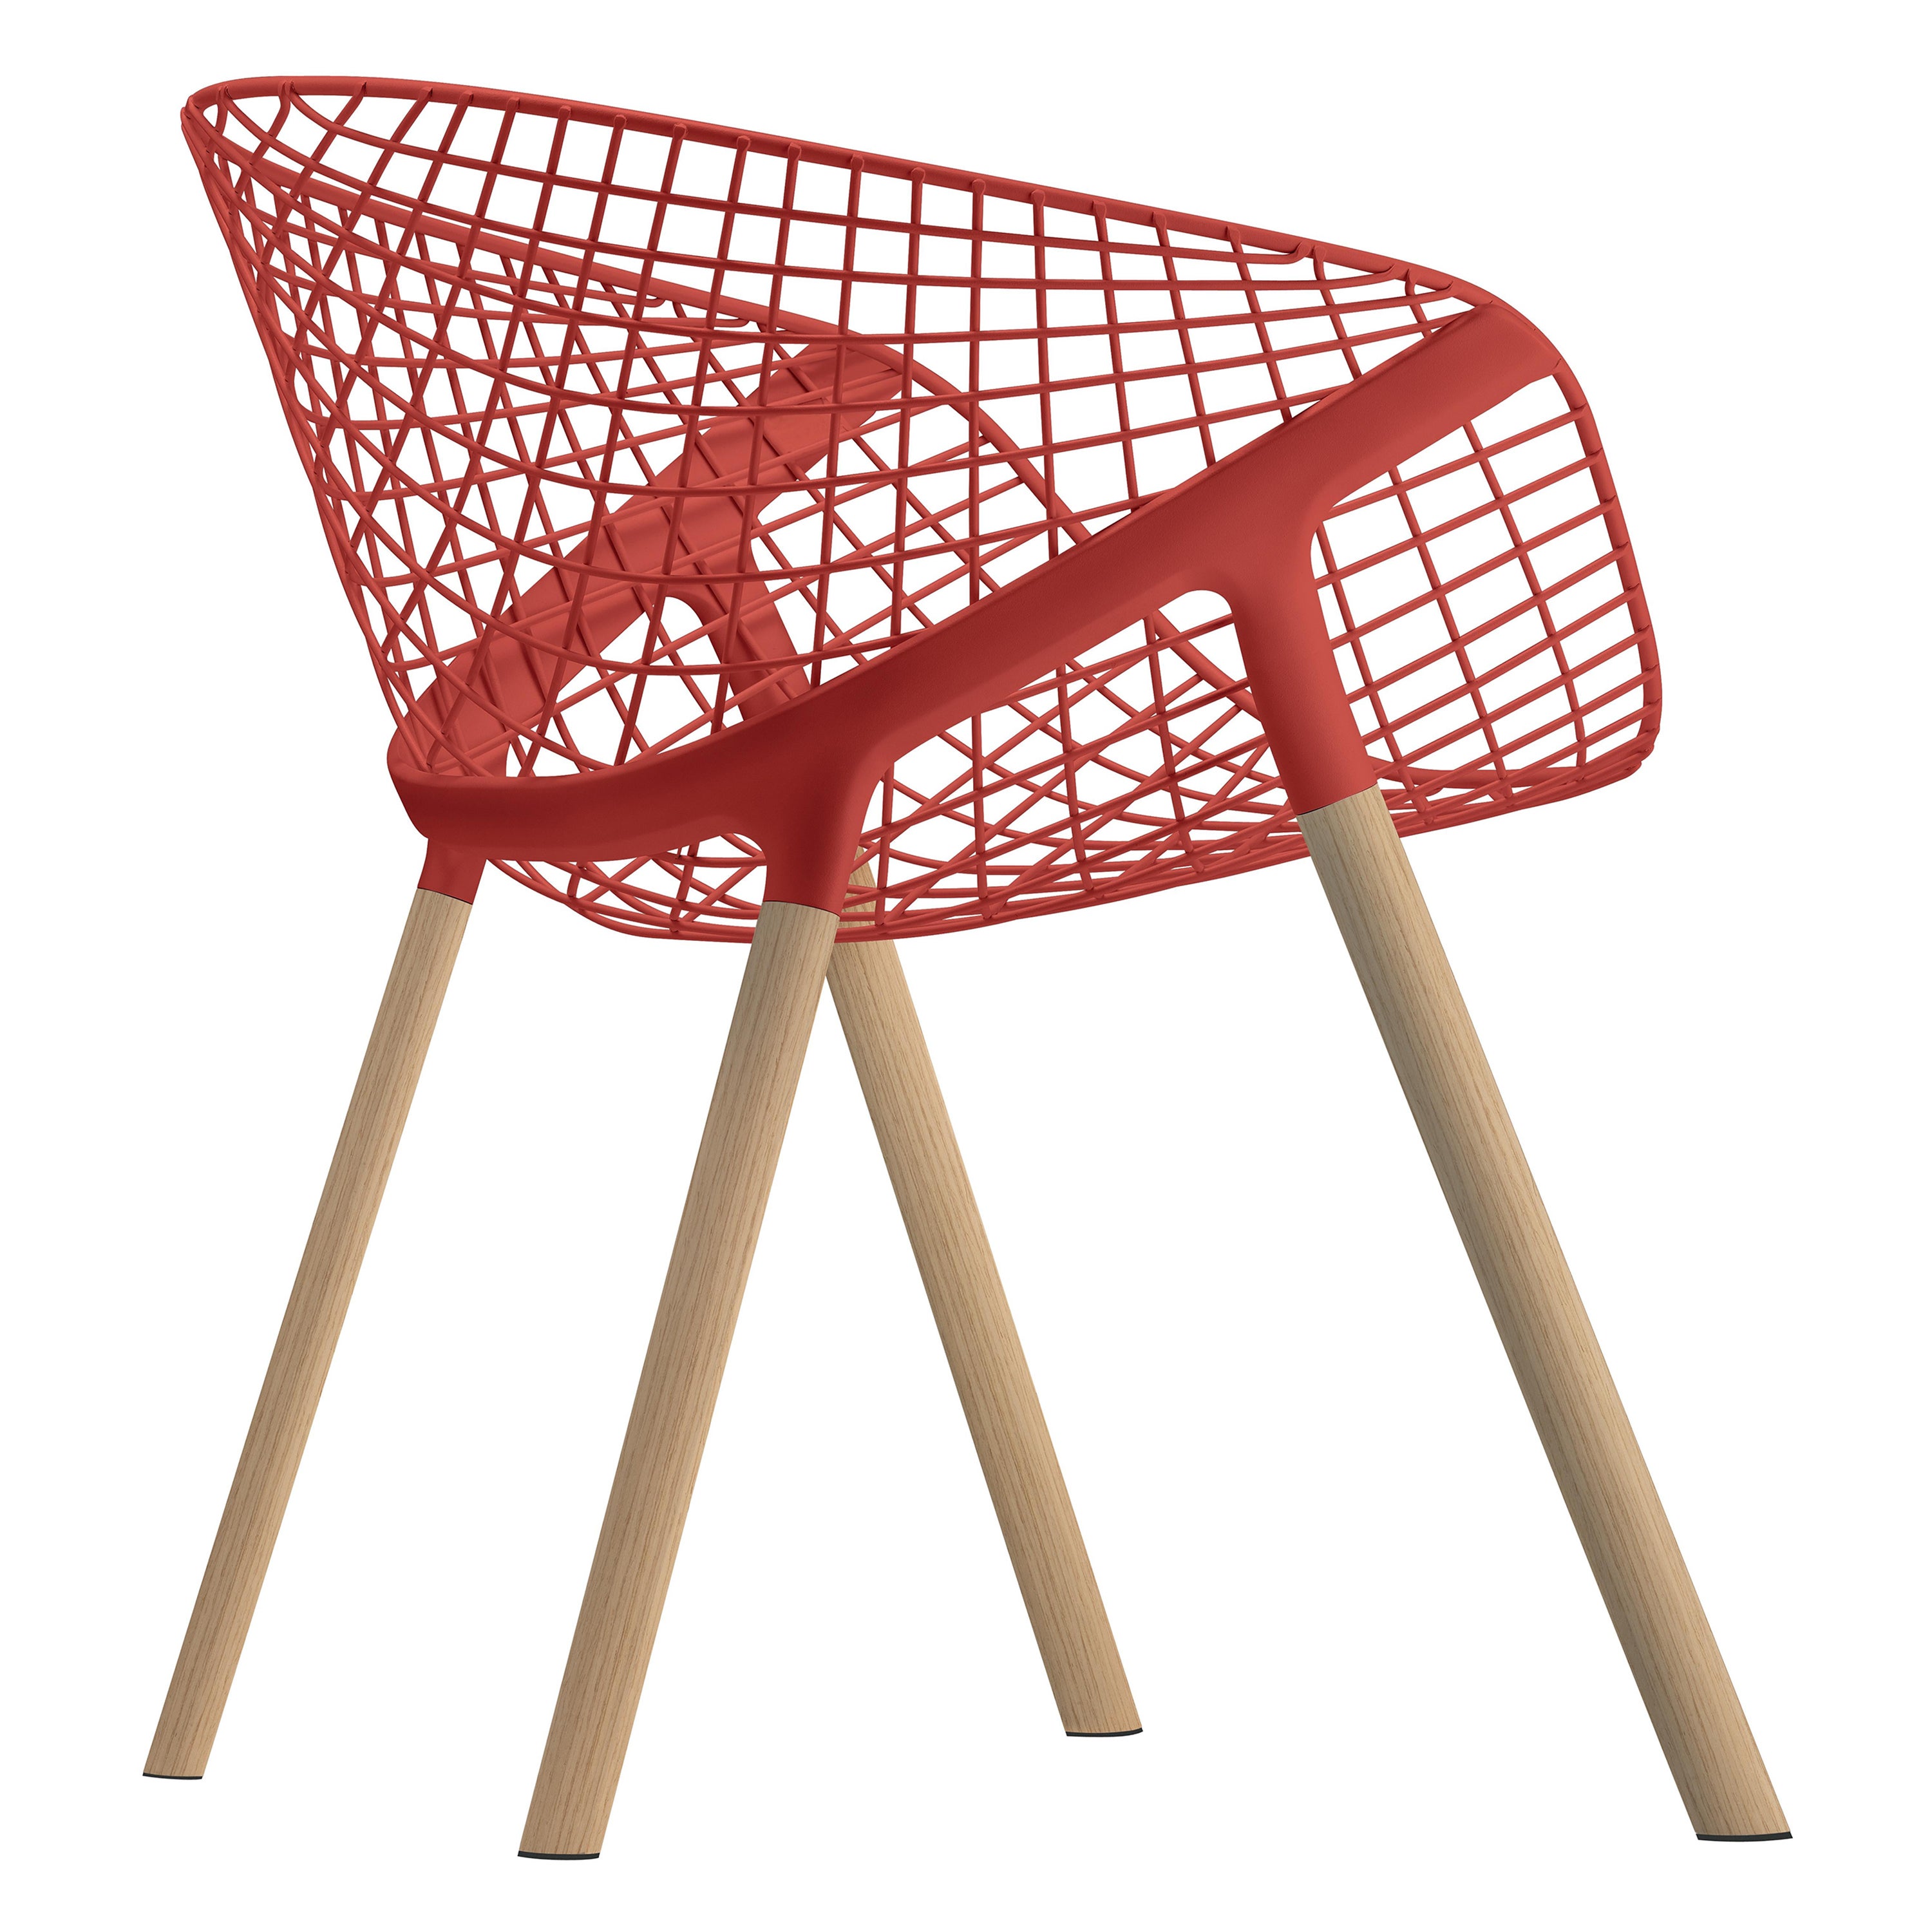 Alias 041 Kobi Wood Chair in Coral Red Lacquered and Natural Oak Frame For Sale